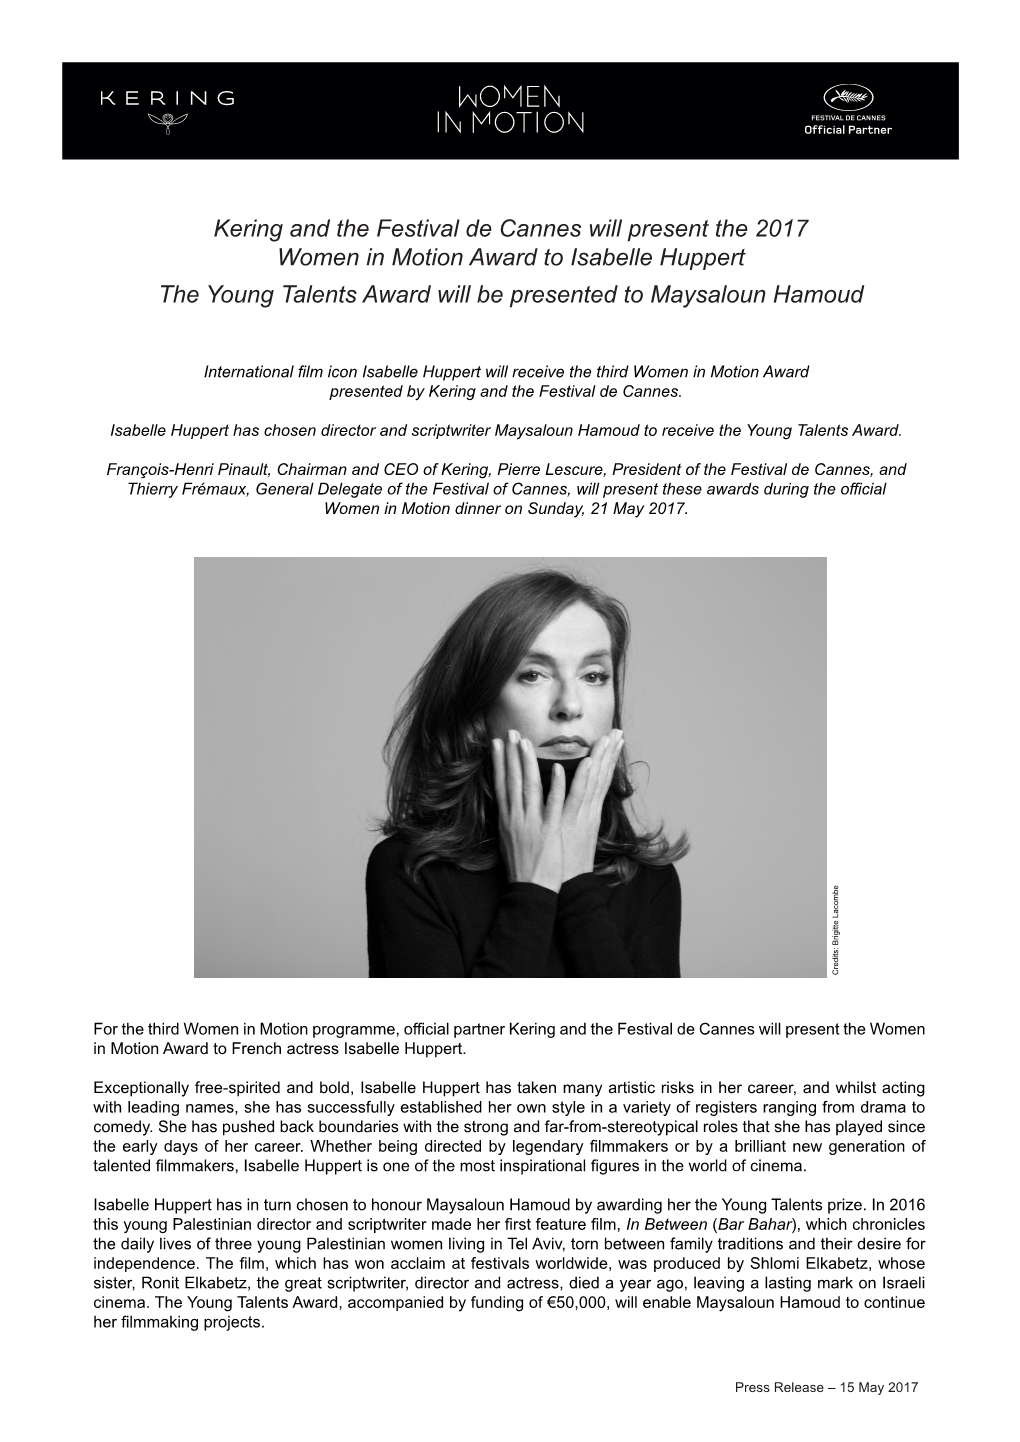 Kering and the Festival De Cannes Will Present the 2017 Women in Motion Award to Isabelle Huppert the Young Talents Award Will Be Presented to Maysaloun Hamoud